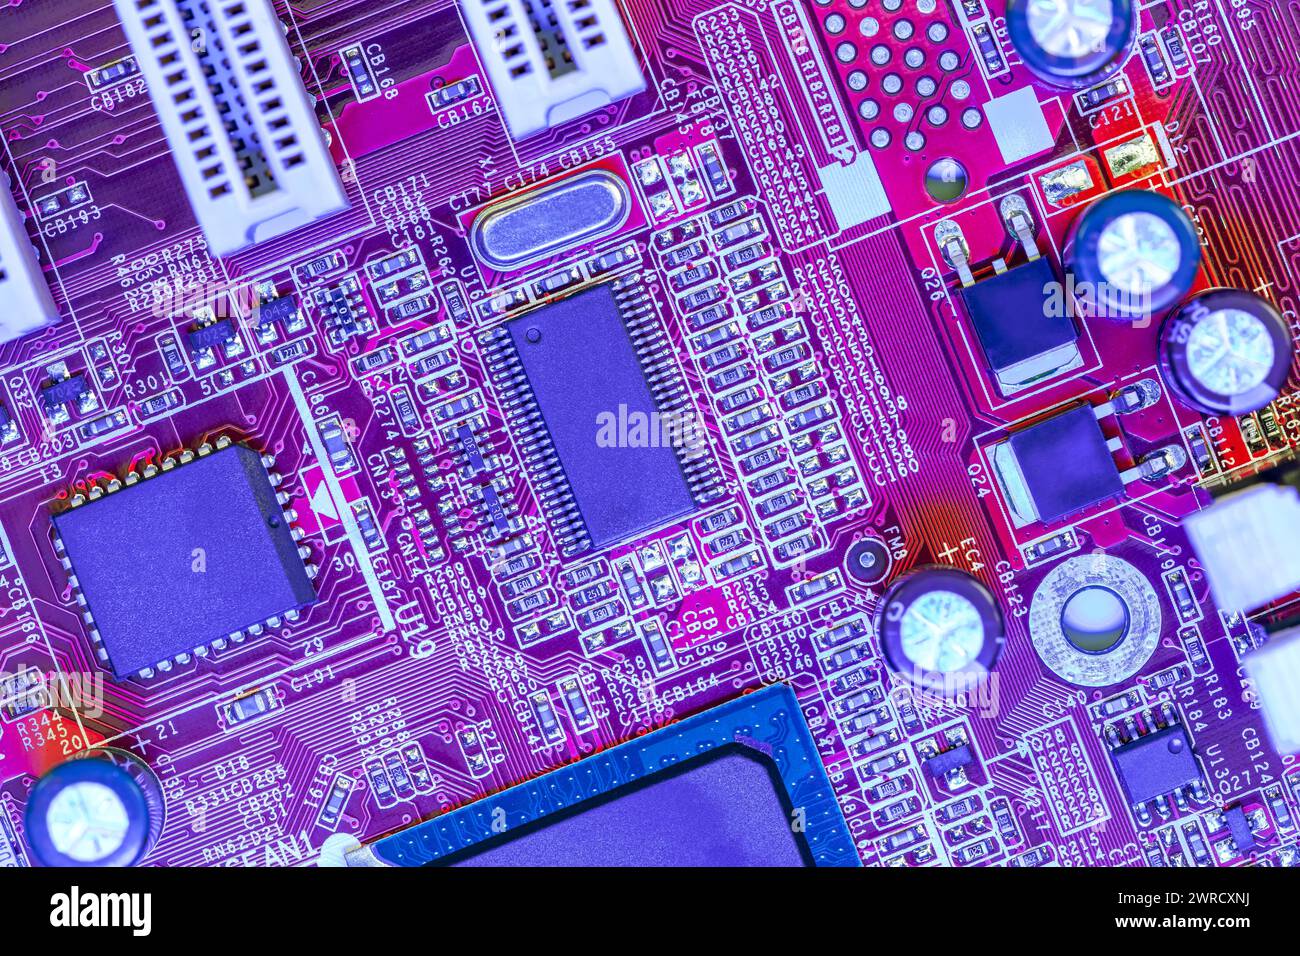 printed circuit board with different electrical components in colored illumination. Stock Photo